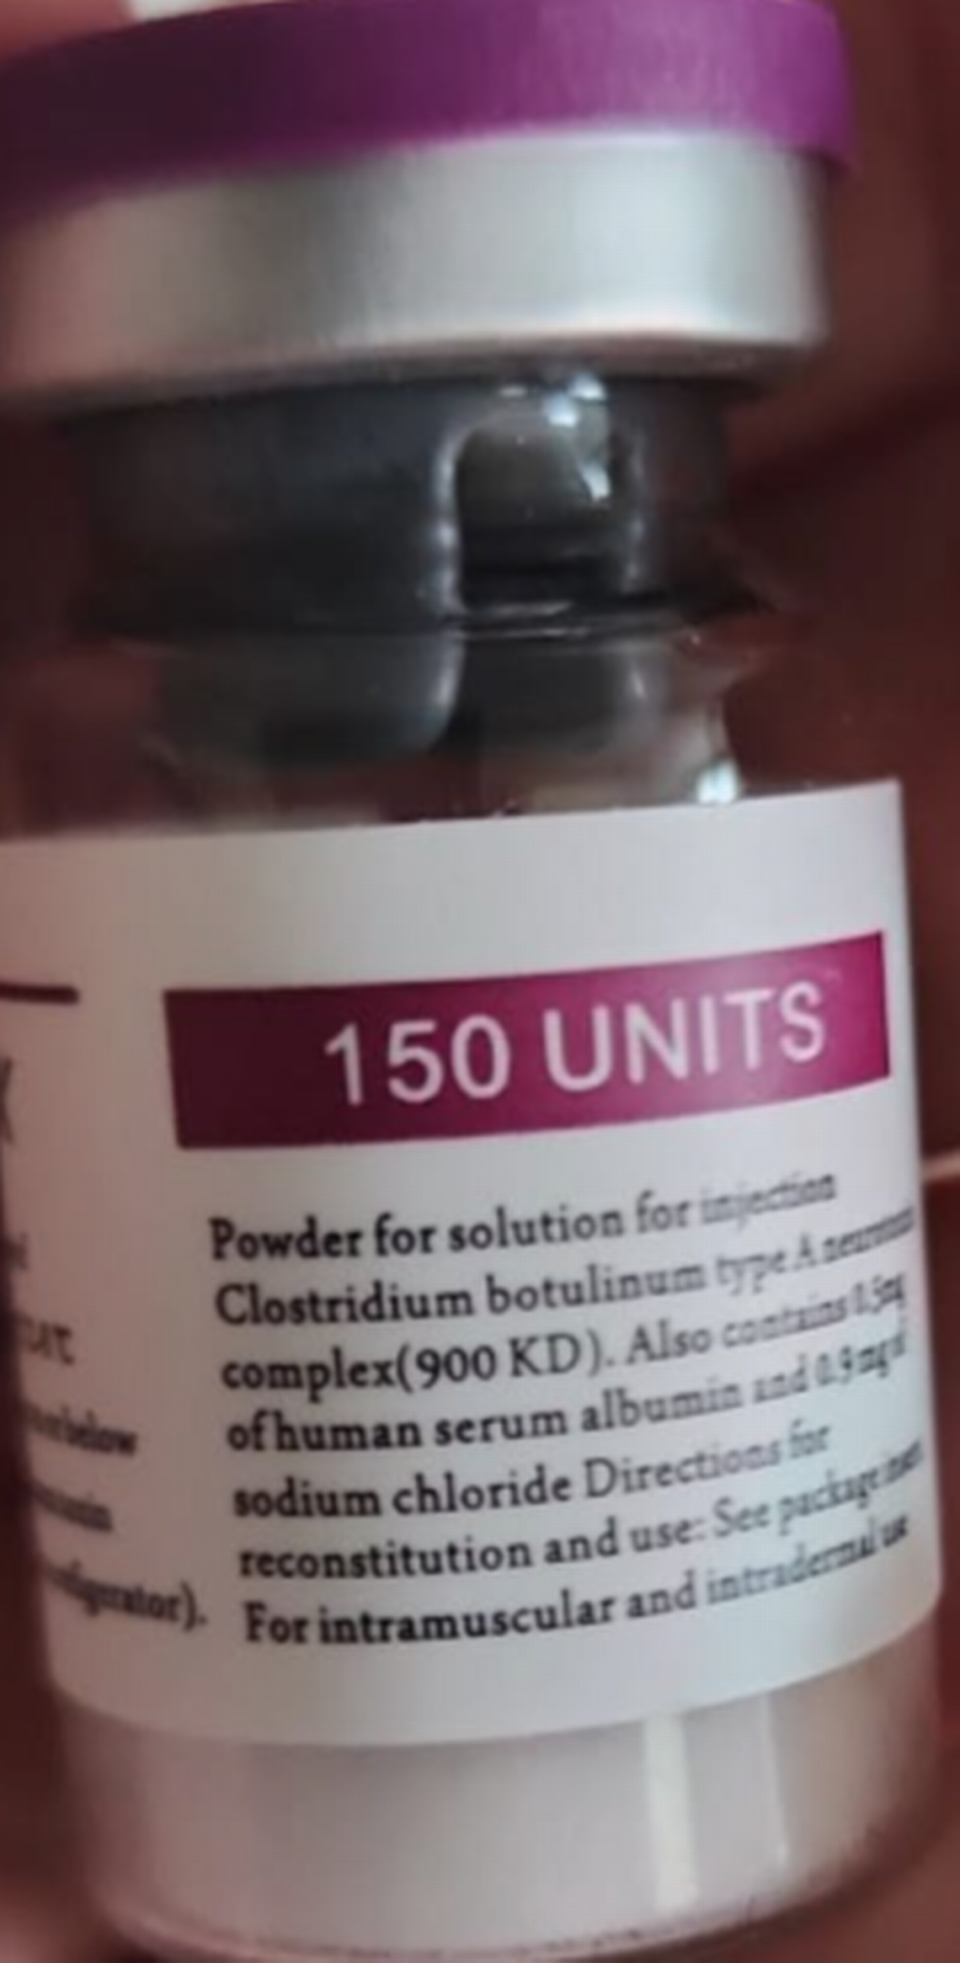 The FDA says neither of the companies that produce actual Botox have 150-unit bottles.